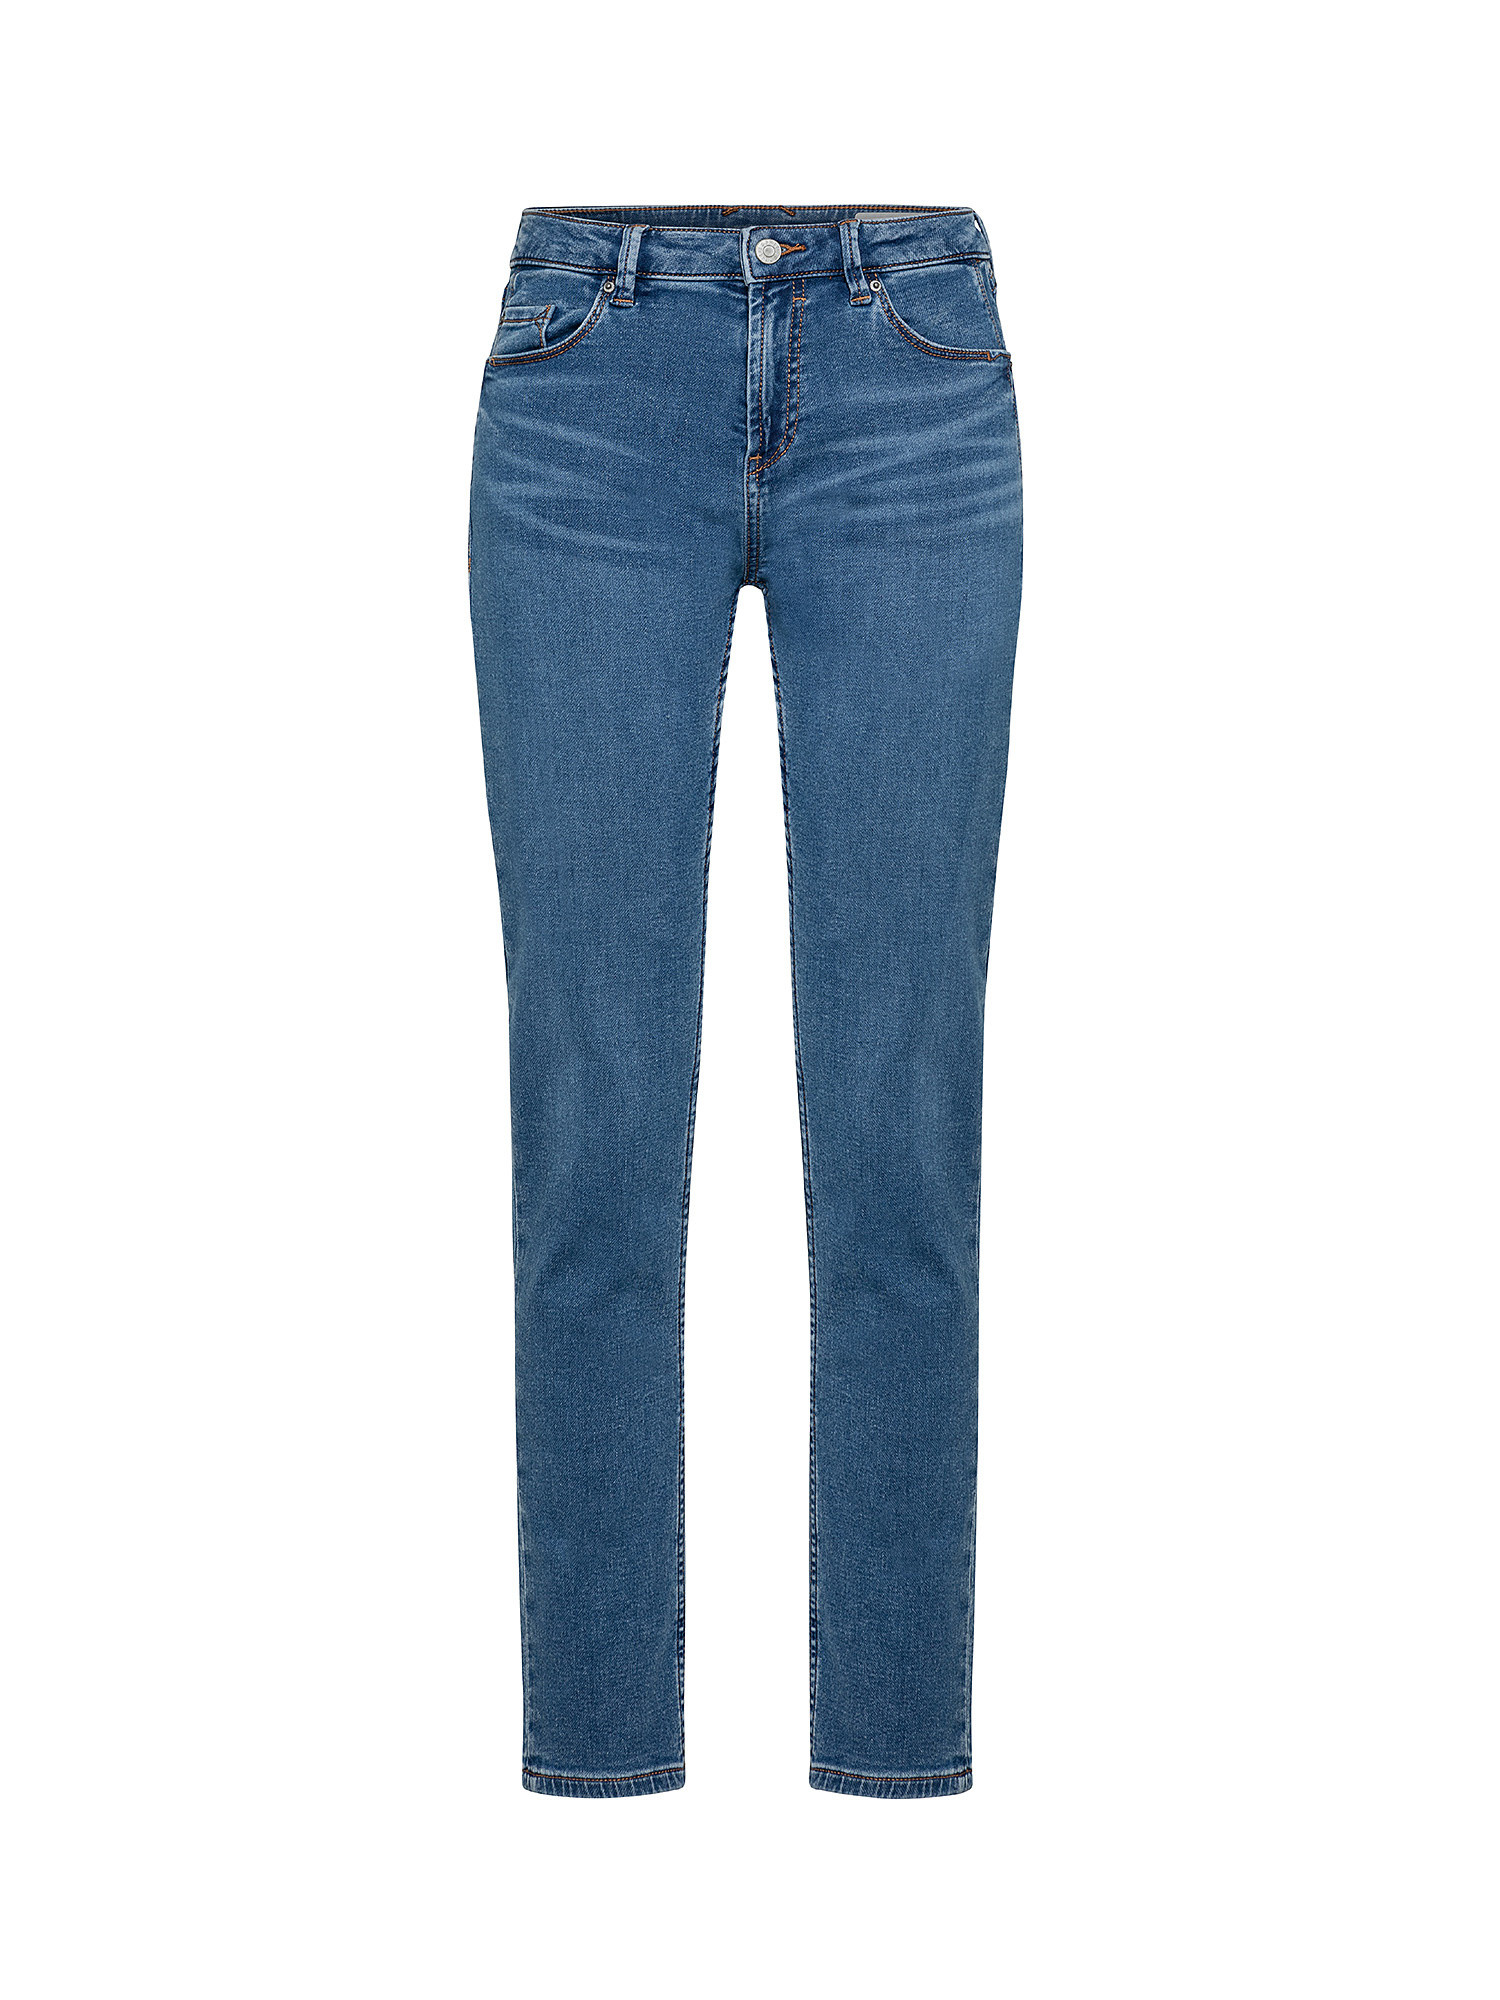 Jeans stretch in misto cotone biologico, Blu, large image number 0